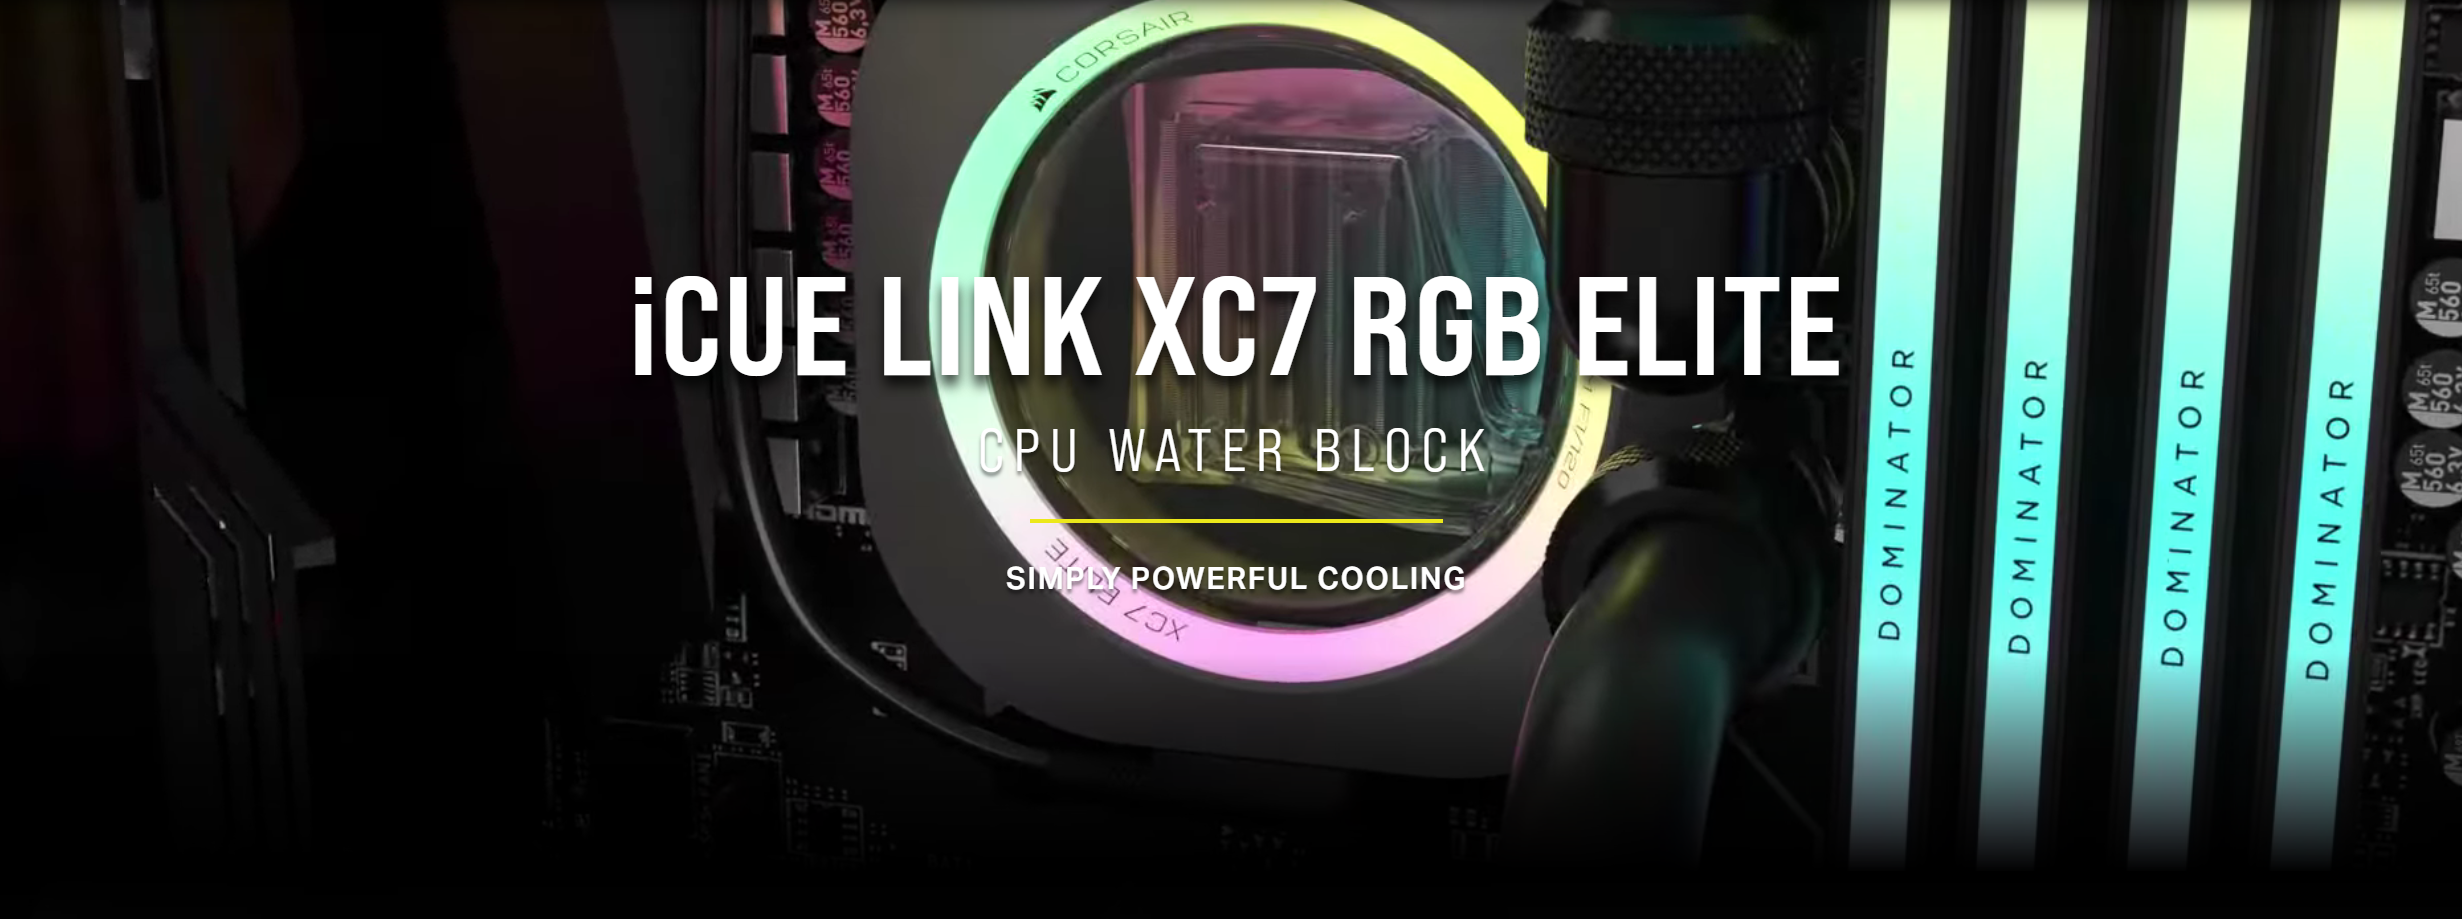 A large marketing image providing additional information about the product Corsair iCUE LINK XC7 RGB Elite CPU Water Block - White - Additional alt info not provided